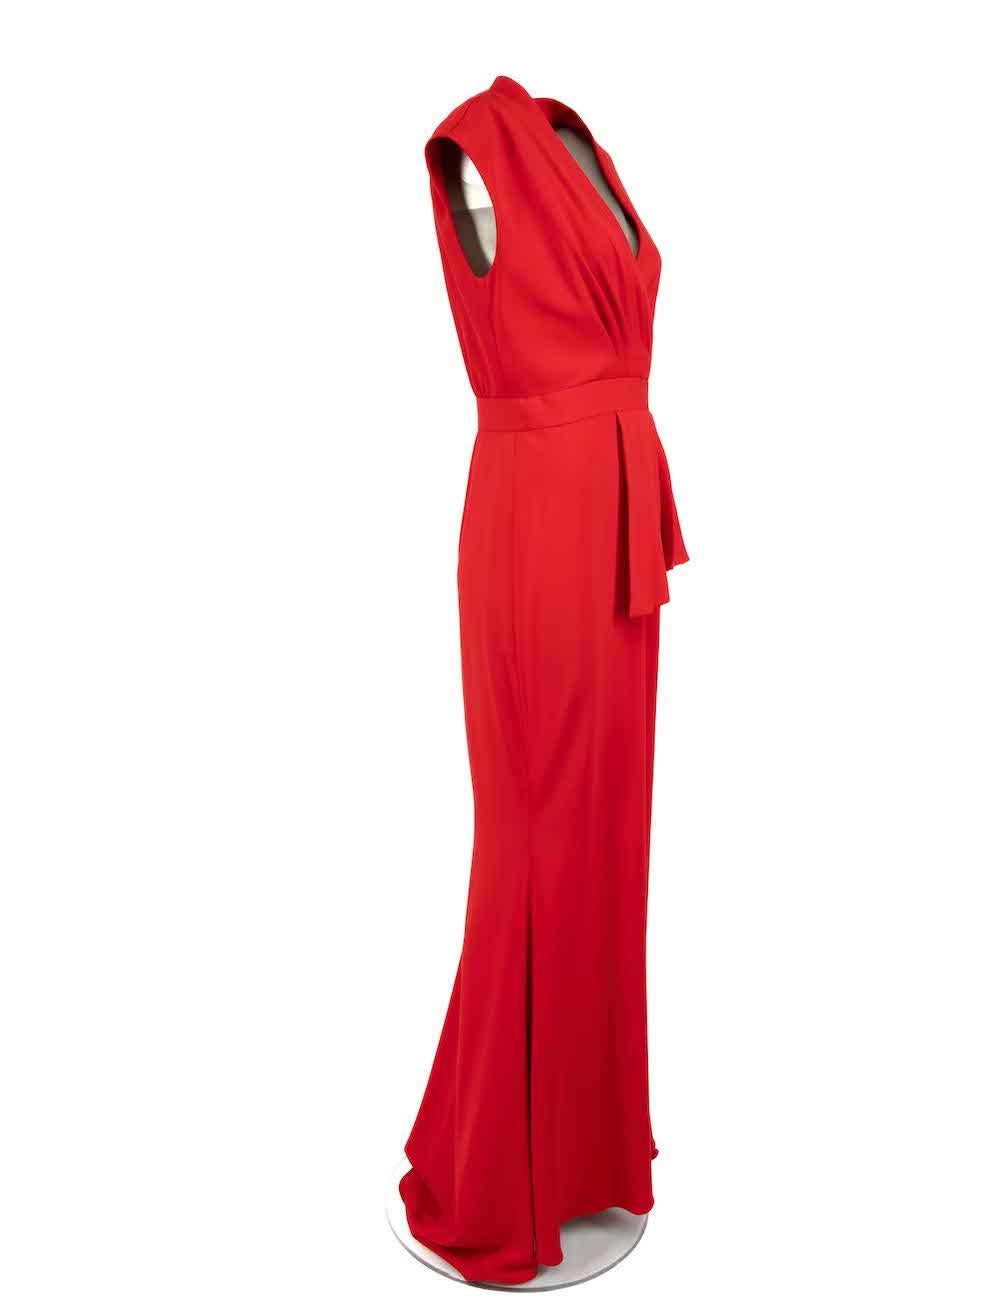 CONDITION is Very good. Hardly any visible wear to dress is evident on this used Badgley Mischka designer resale item.
 
Details
Red
Polyester
Dress
Sleeveless
Pleated detail
V-neck
Maxi
Back zip and hook fastening

Made in China
 
Composition
98%